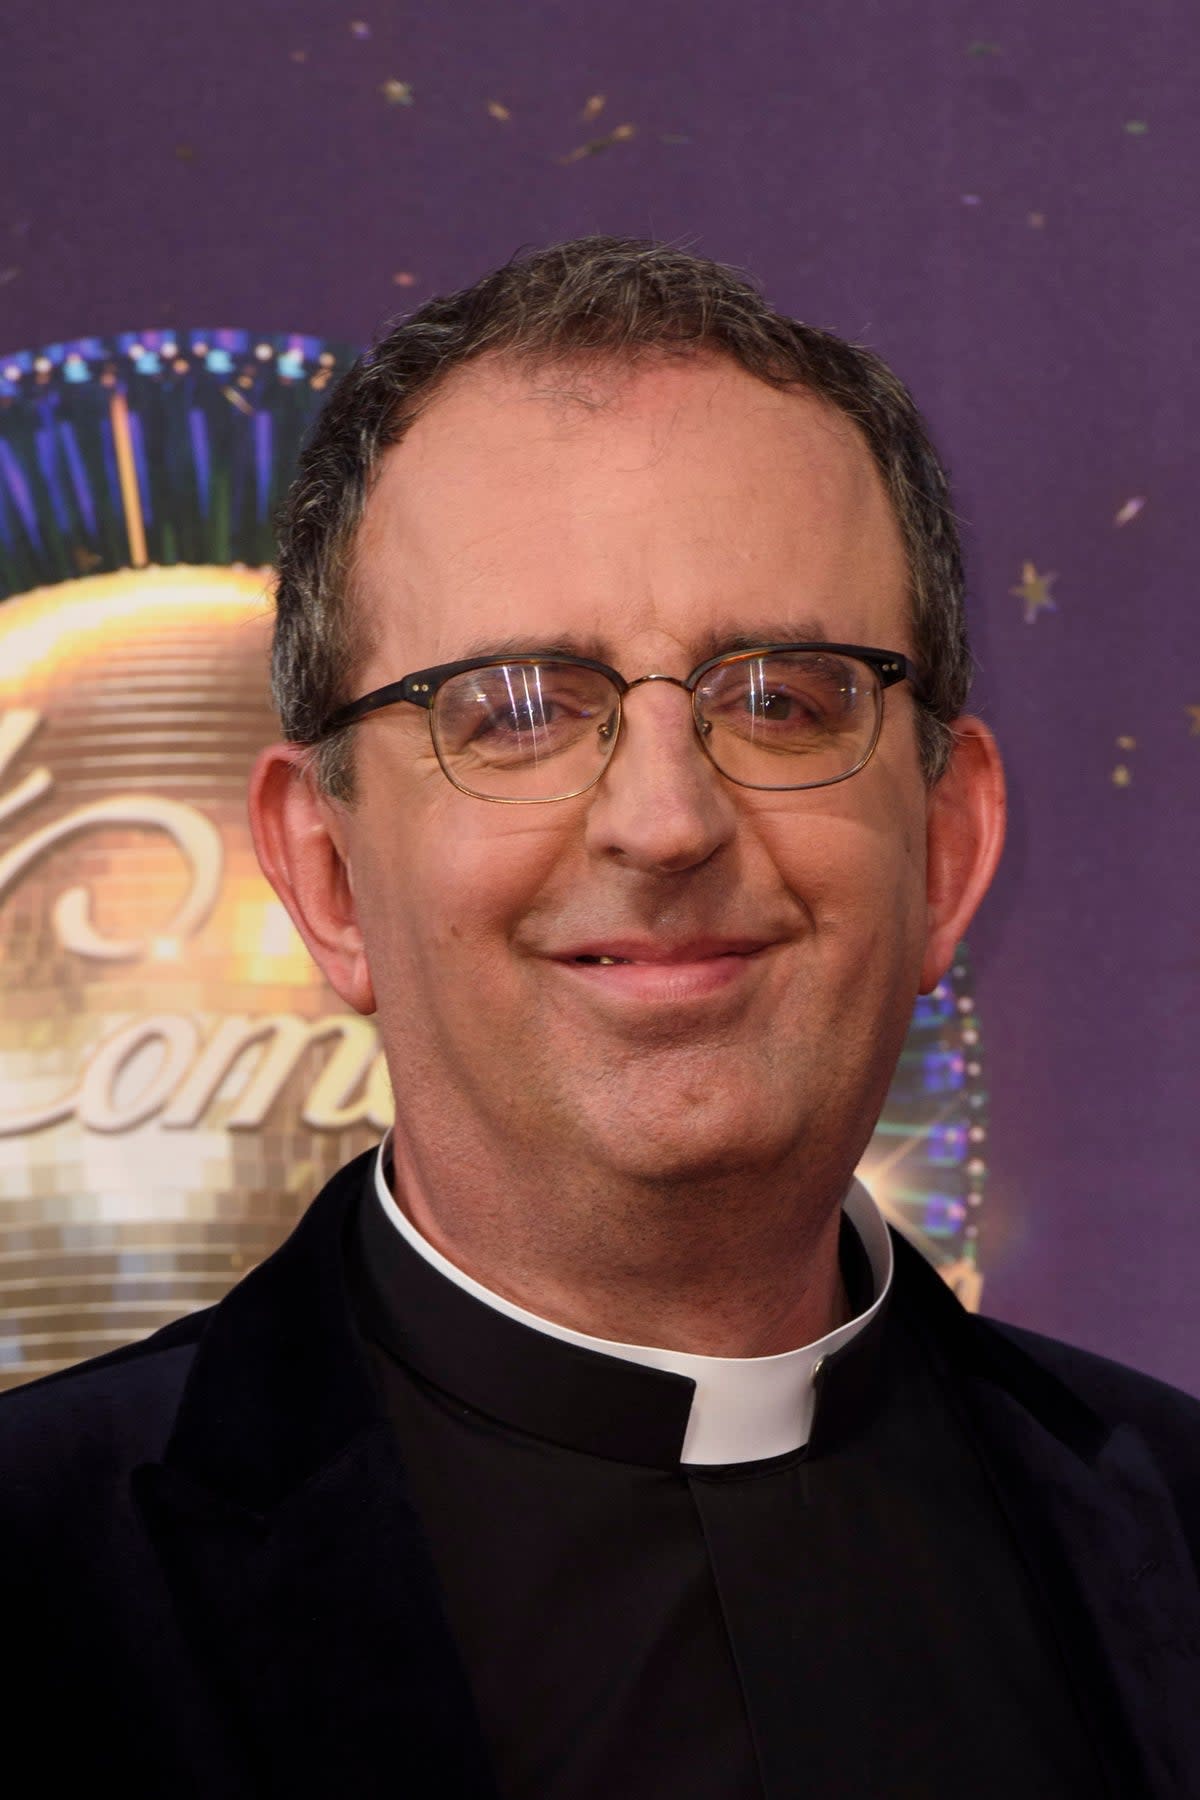 Reverend Richard Coles has said it is ‘frustrating’ that the Church of England is resisting giving the LGBT community equal status (Matt Crossick/PA) (PA Archive)